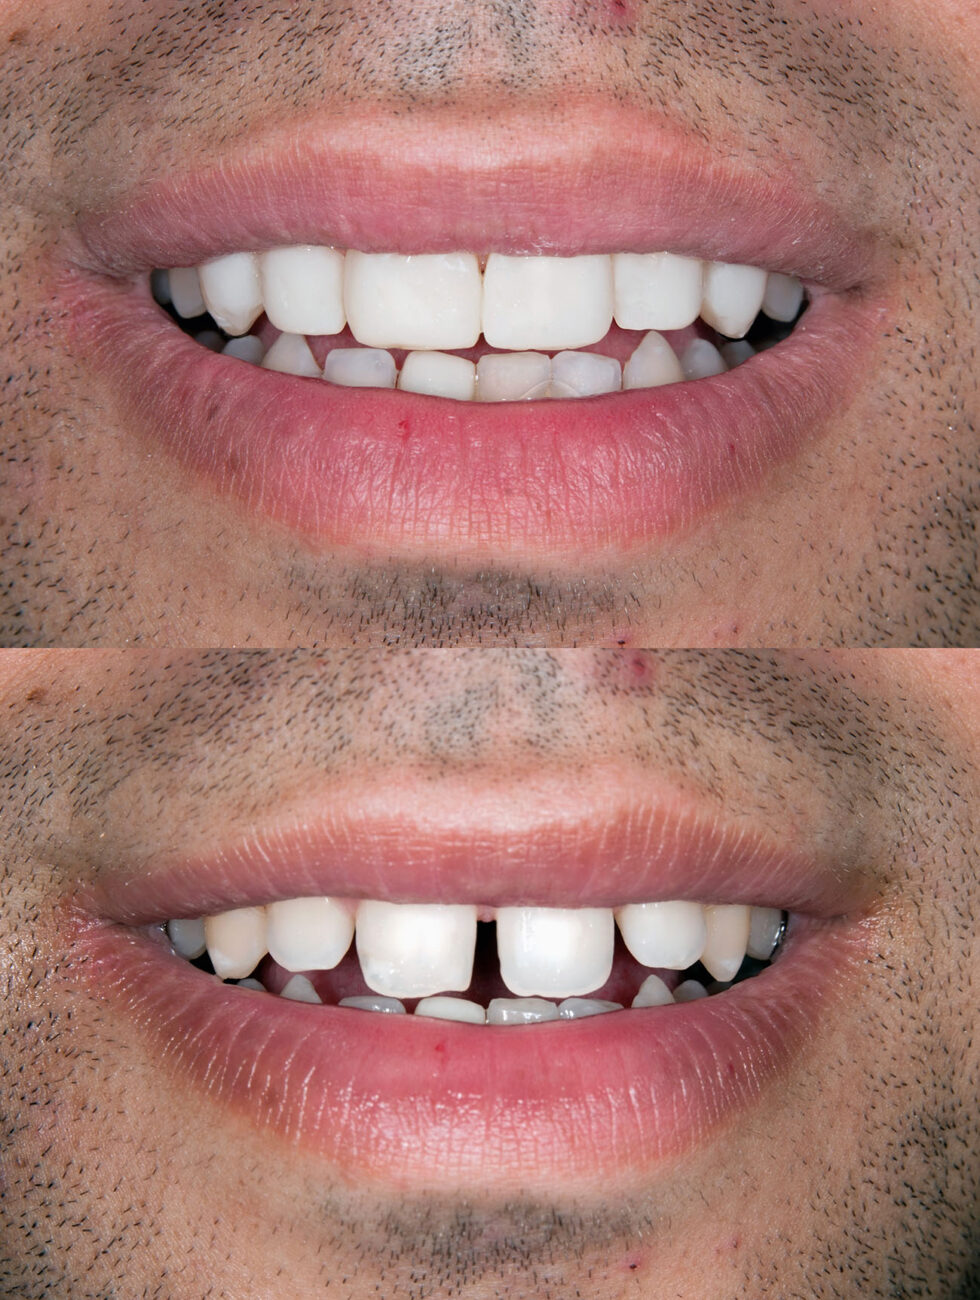 Smile with gaps in the teeth before and after cosmetic treatment dentist in Allentown Pennsylvania